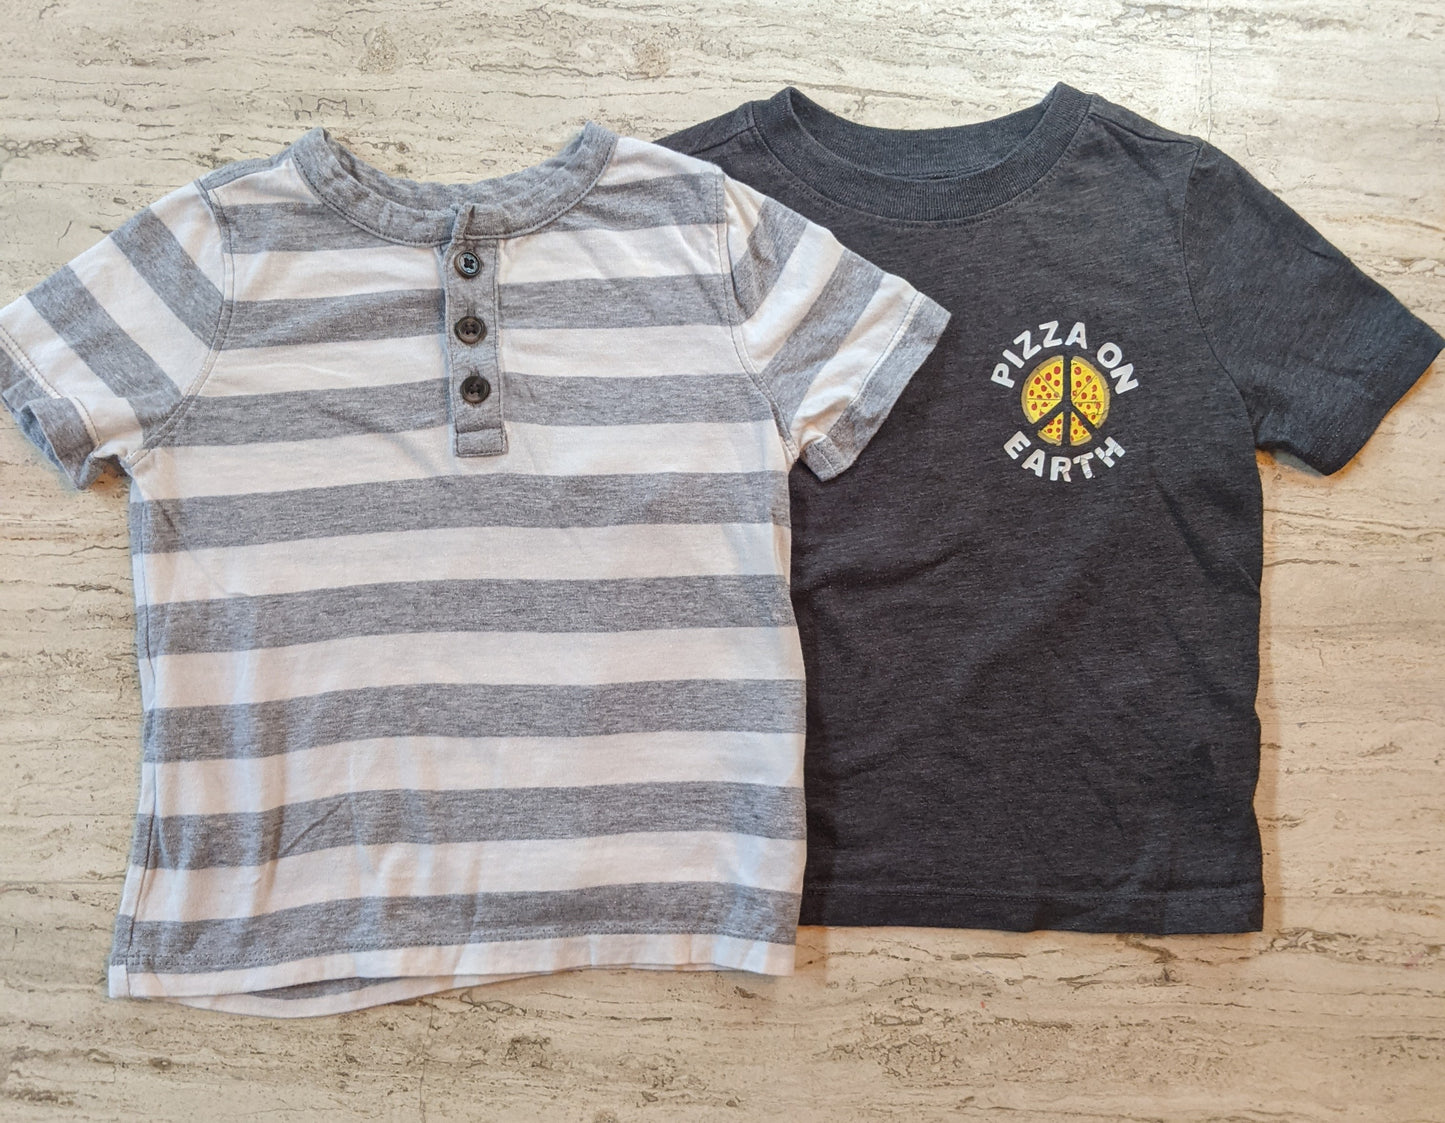 Old Navy Shirts - 2T - 2 Pack - PPU 45226